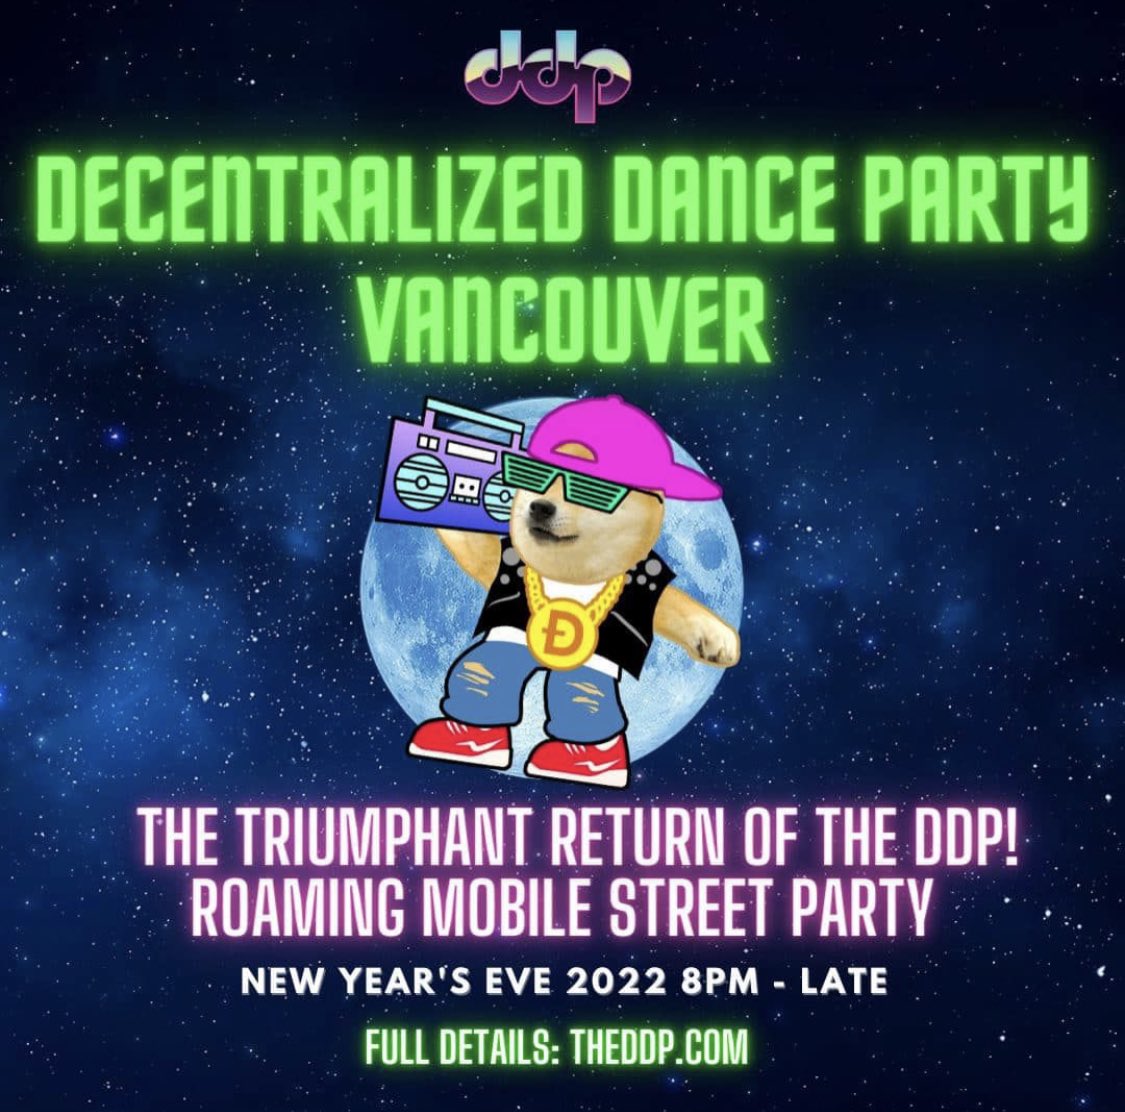 The Decentralized Dance Party returns to the streets of #Vancouver for New Year's Eve 2022! Full info: TheDDP.com #NewYearsEve